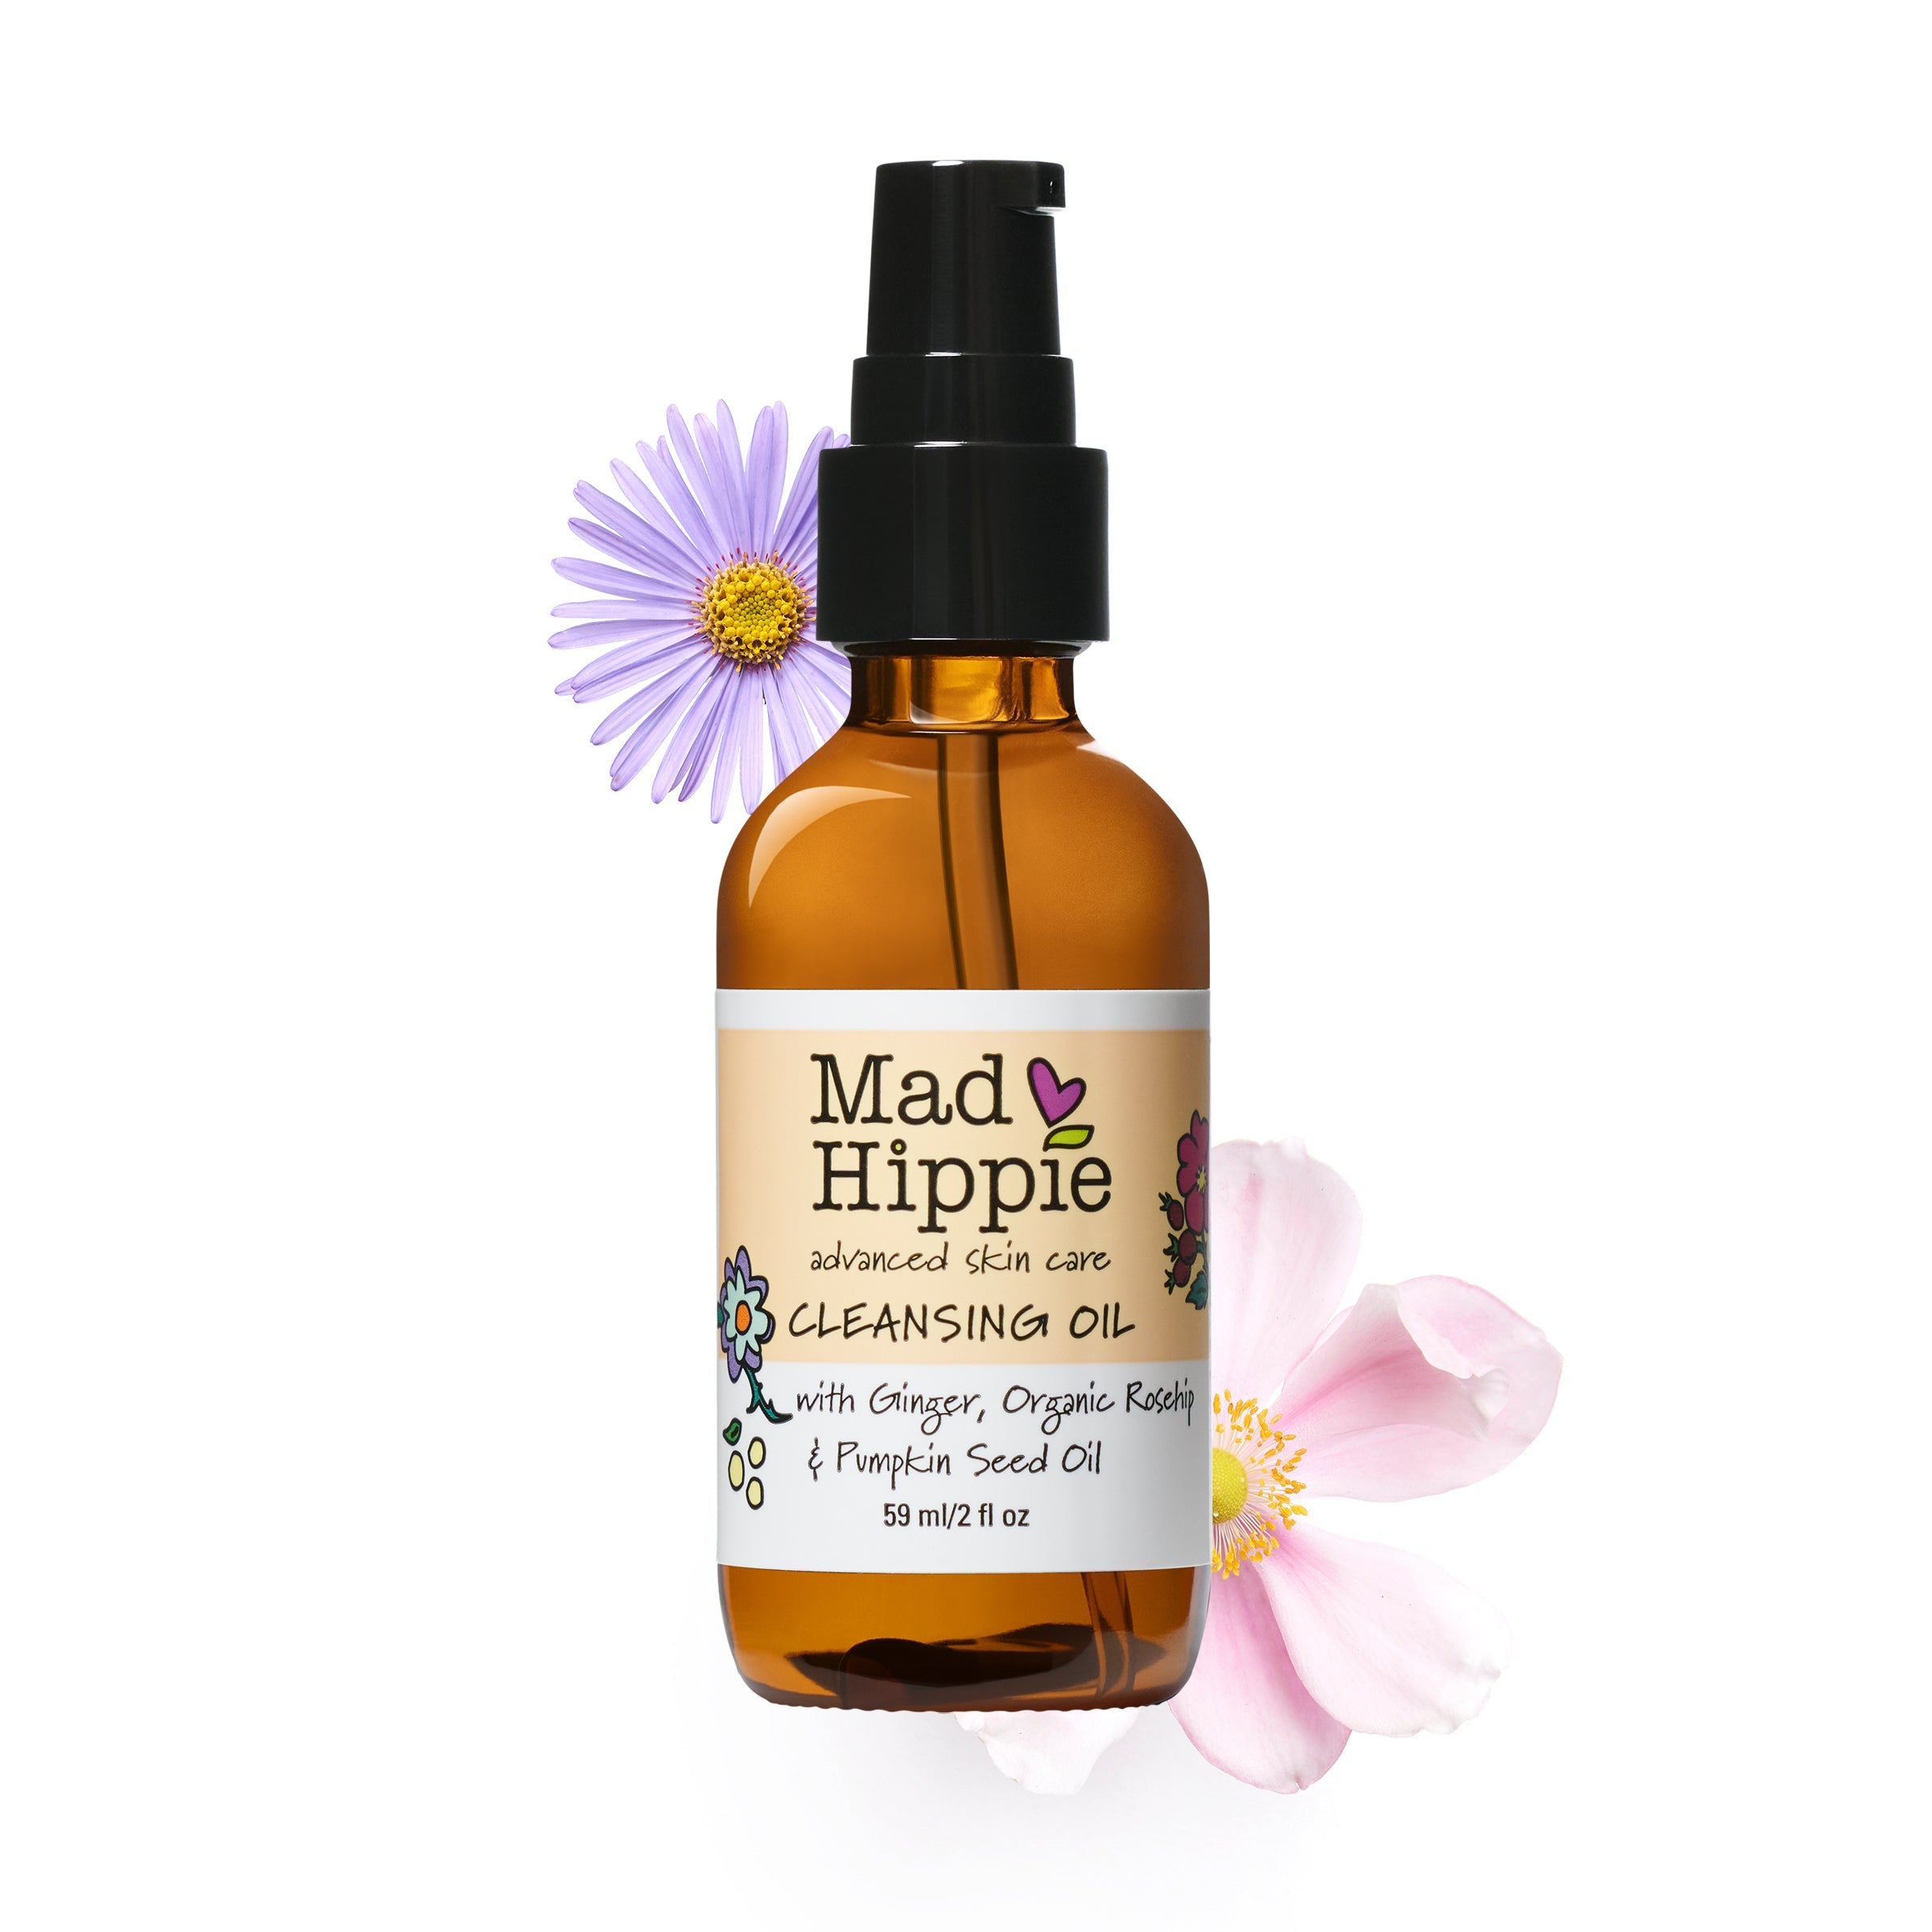 Mad Hippie Cleansing Oil 2oz